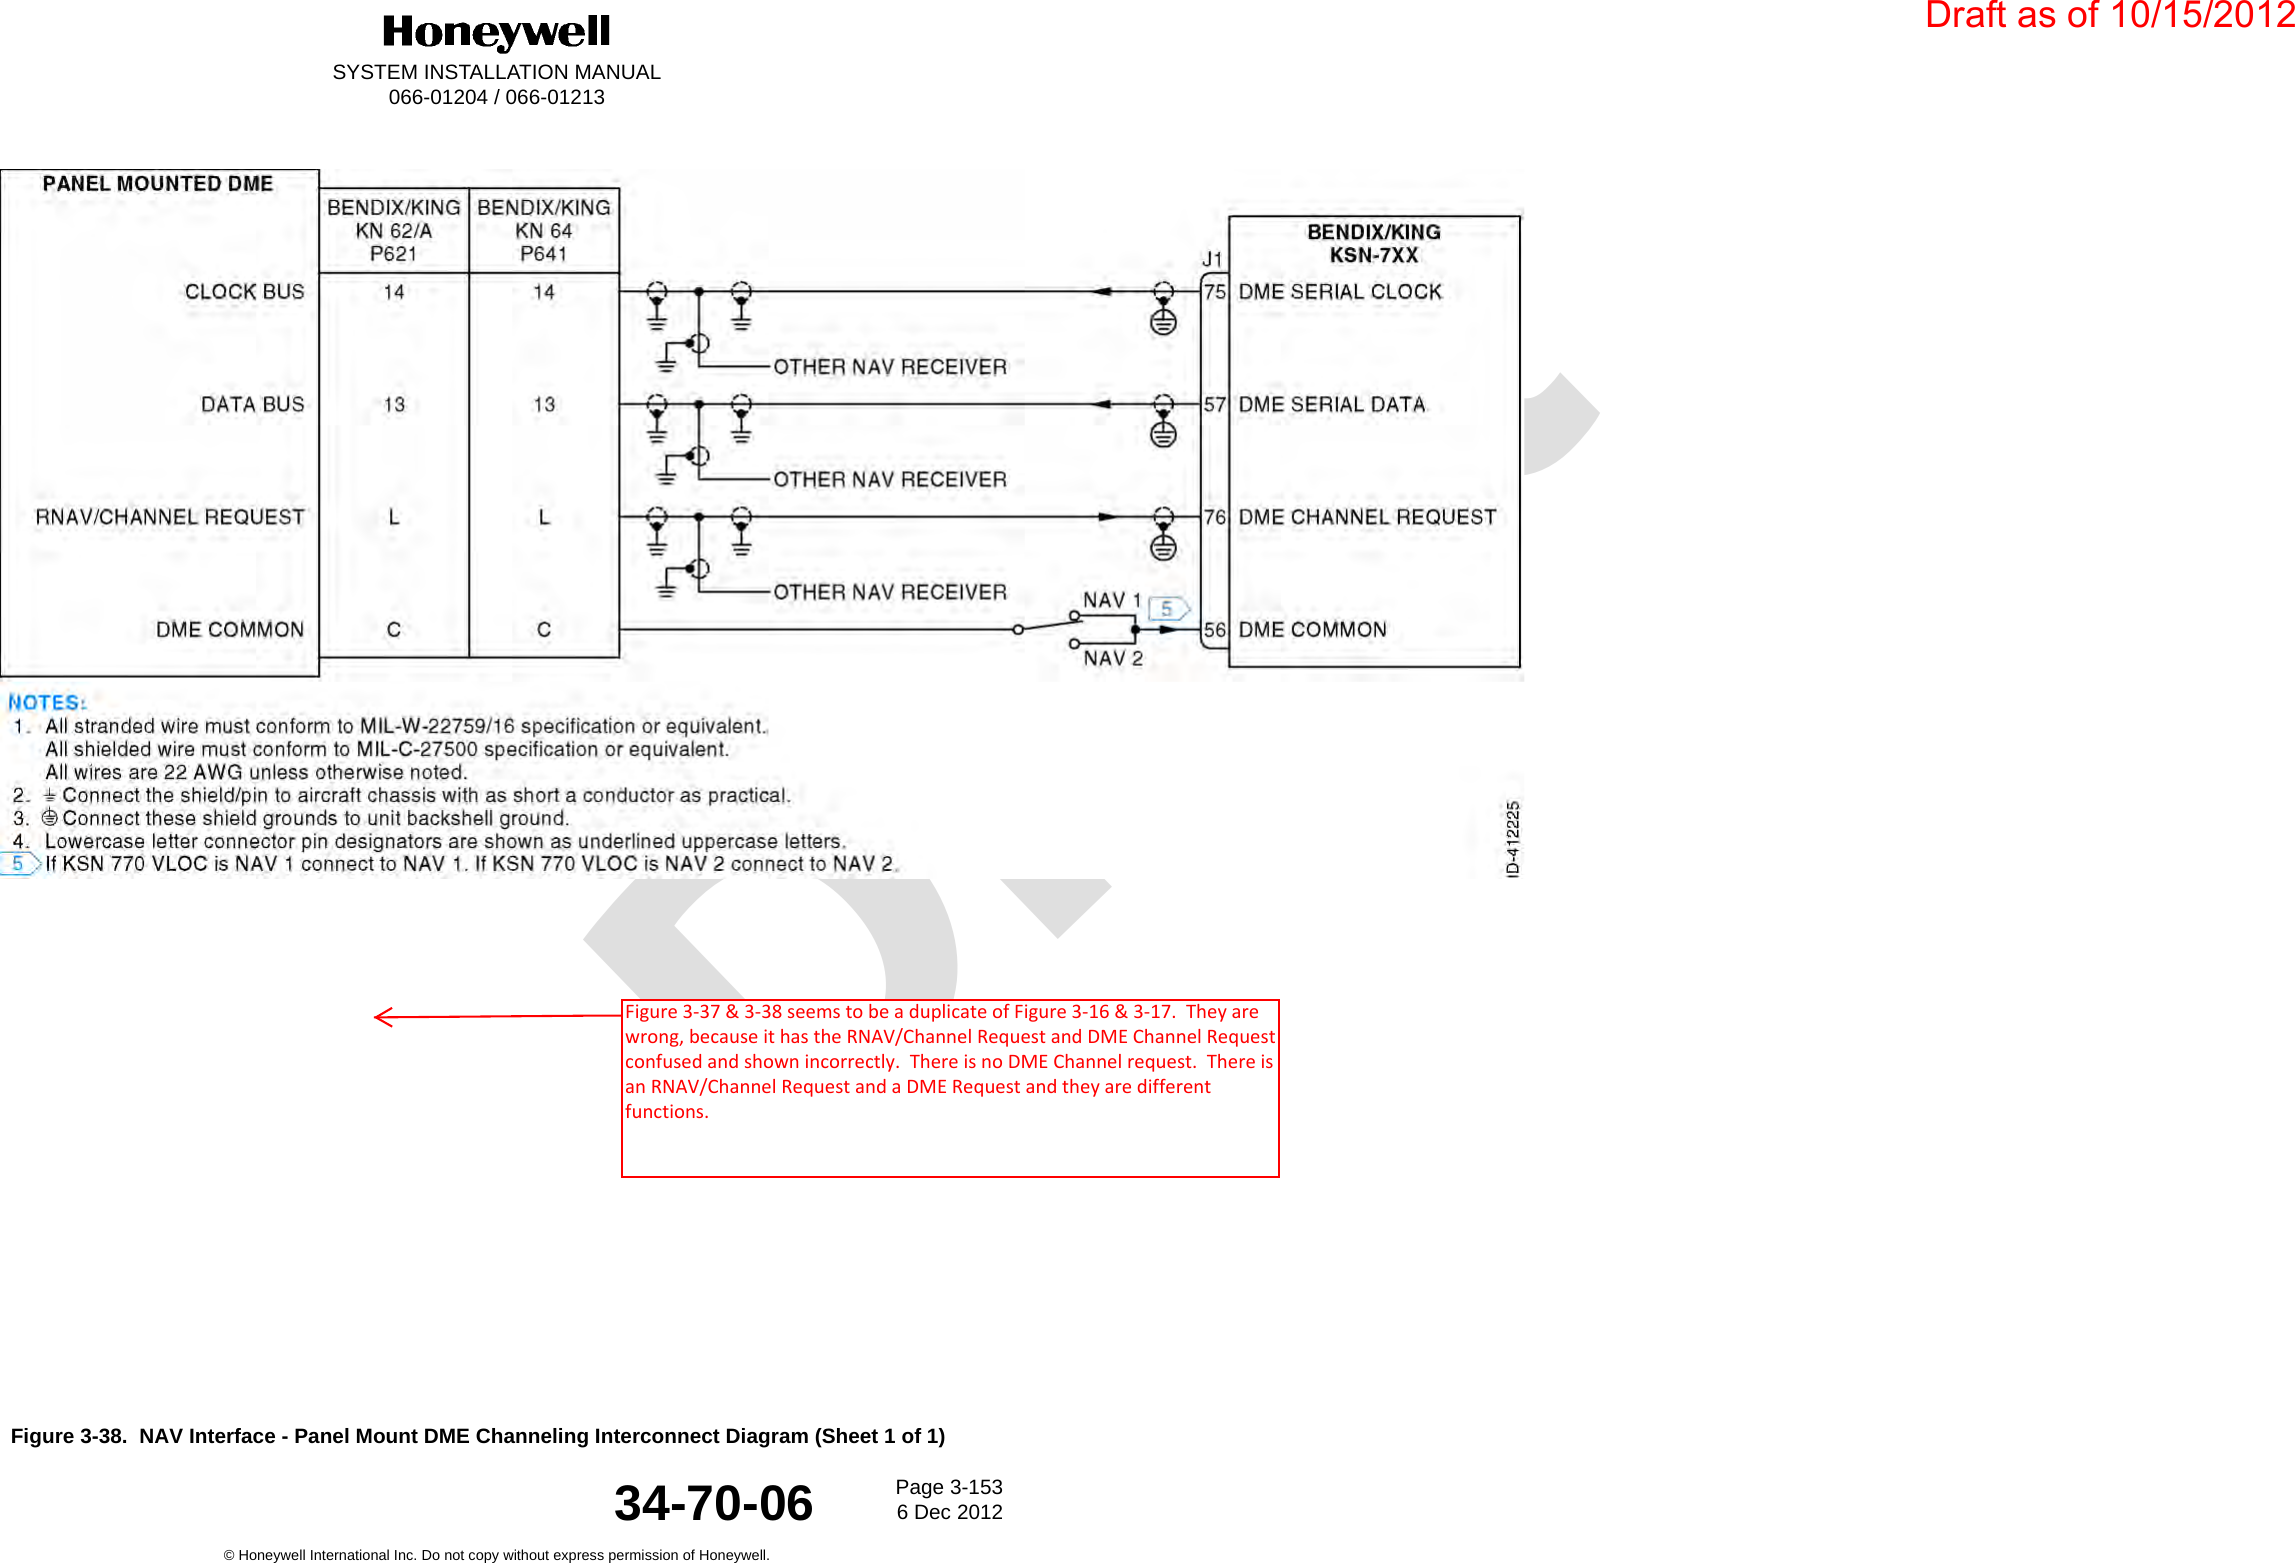 DraftSYSTEM INSTALLATION MANUAL066-01204 / 066-01213Page 3-1536 Dec 2012© Honeywell International Inc. Do not copy without express permission of Honeywell.34-70-06Figure 3-38.  NAV Interface - Panel Mount DME Channeling Interconnect Diagram (Sheet 1 of 1)Draft as of 10/15/2012Figure 3-37 &amp; 3-38 seems to be a duplicate of Figure 3-16 &amp; 3-17.  They are wrong, because it has the RNAV/Channel Request and DME Channel Request confused and shown incorrectly.  There is no DME Channel request.  There is an RNAV/Channel Request and a DME Request and they are different functions. 